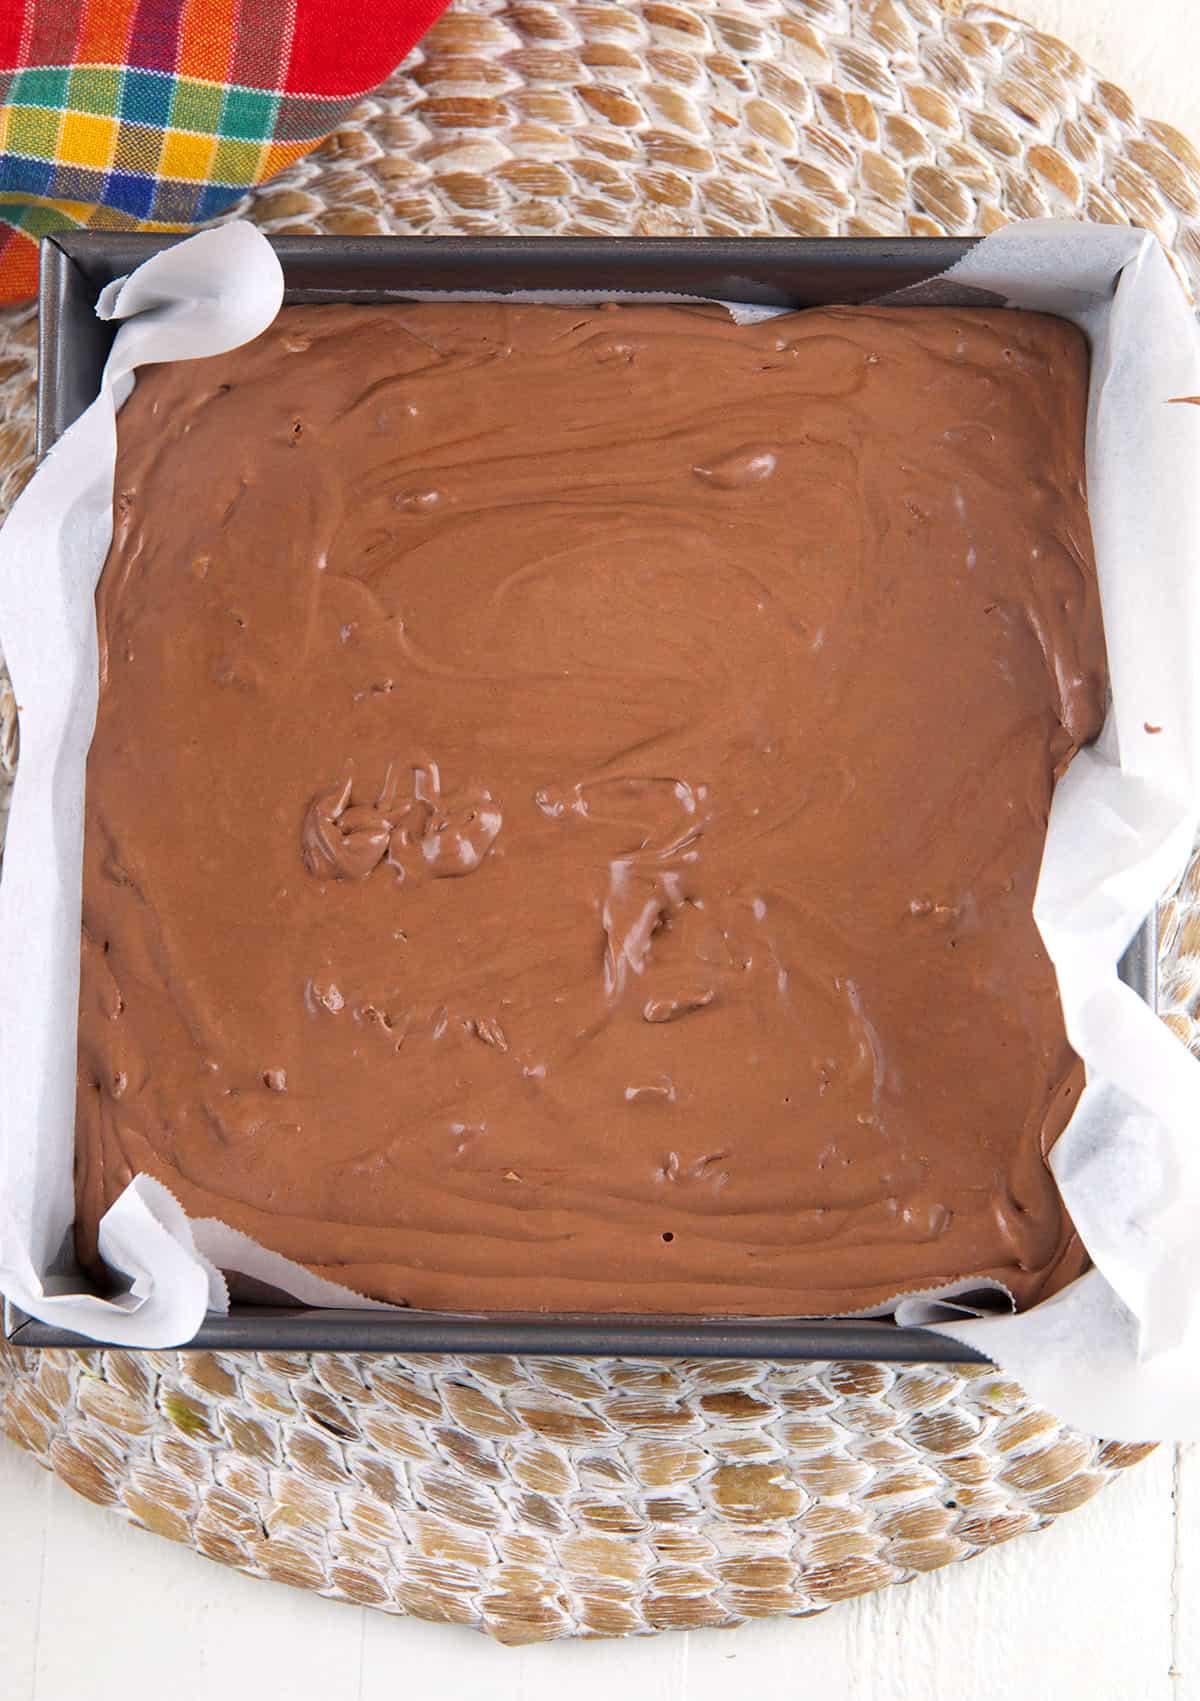 A pan is filled with a liquid fudge mixture that has not yet set.